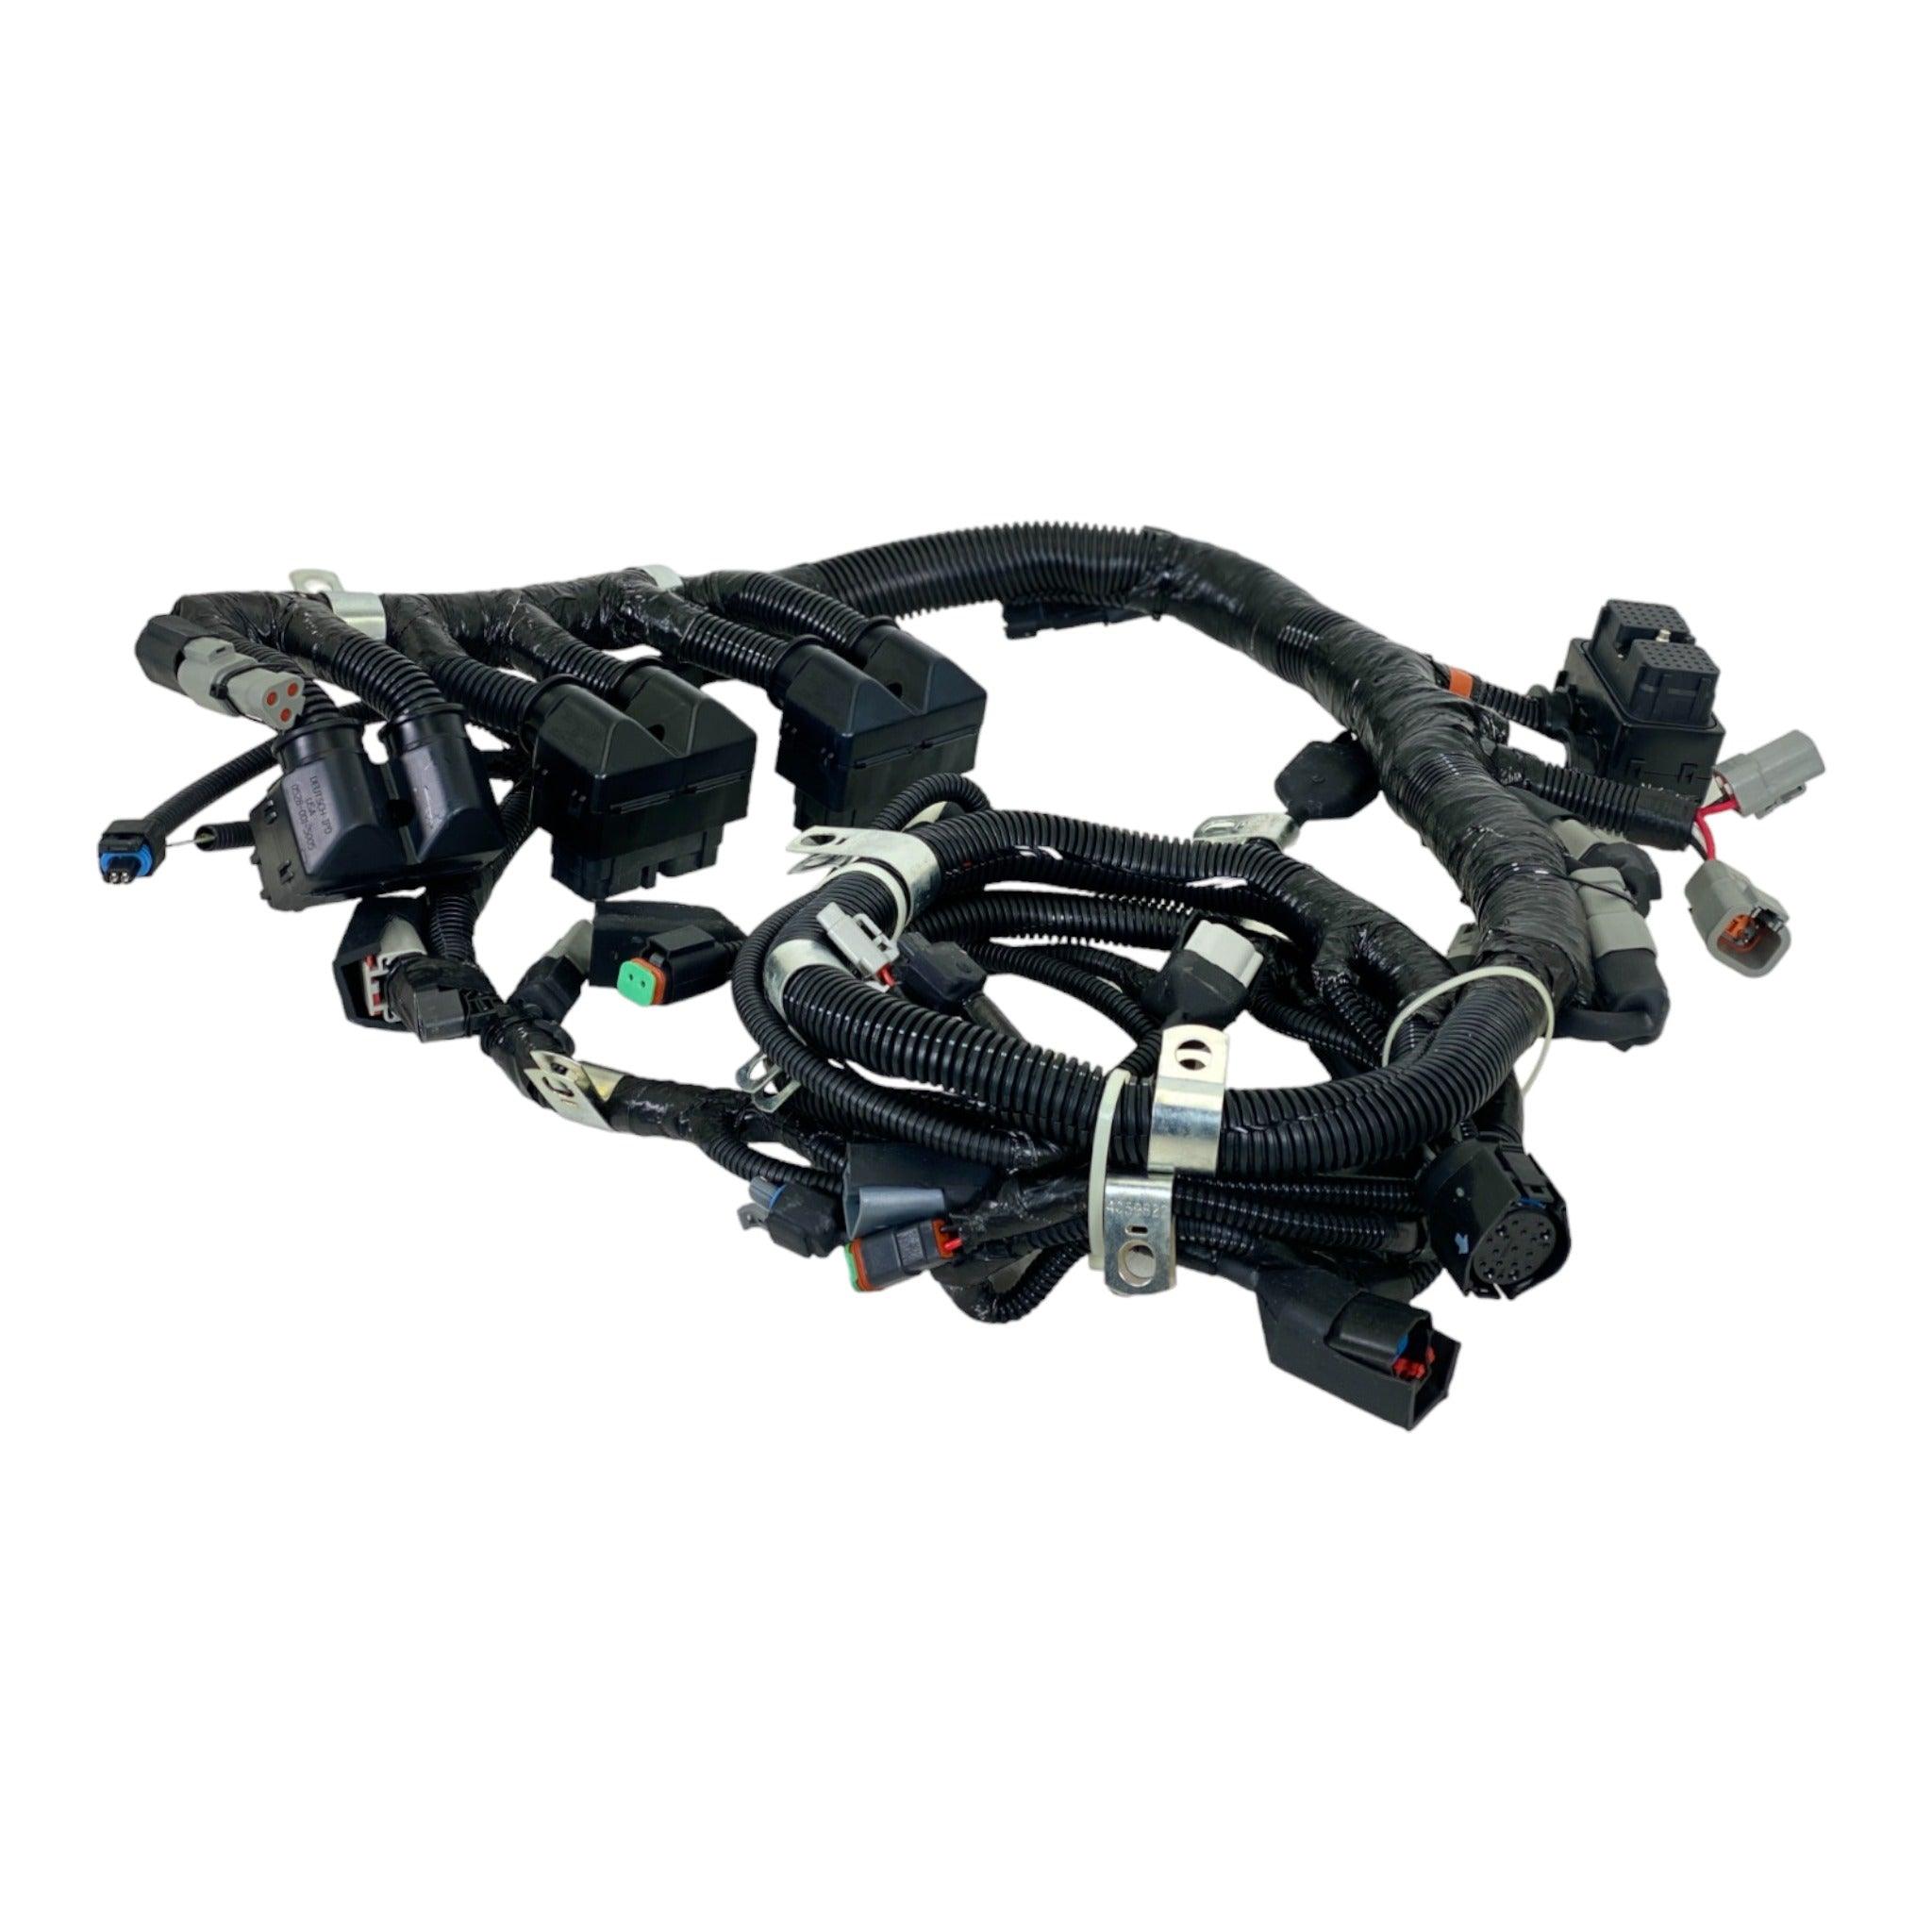 2864506 Genuine Cummins Electronic Control Module Wiring Harness For Ism Qsm - ADVANCED TRUCK PARTS